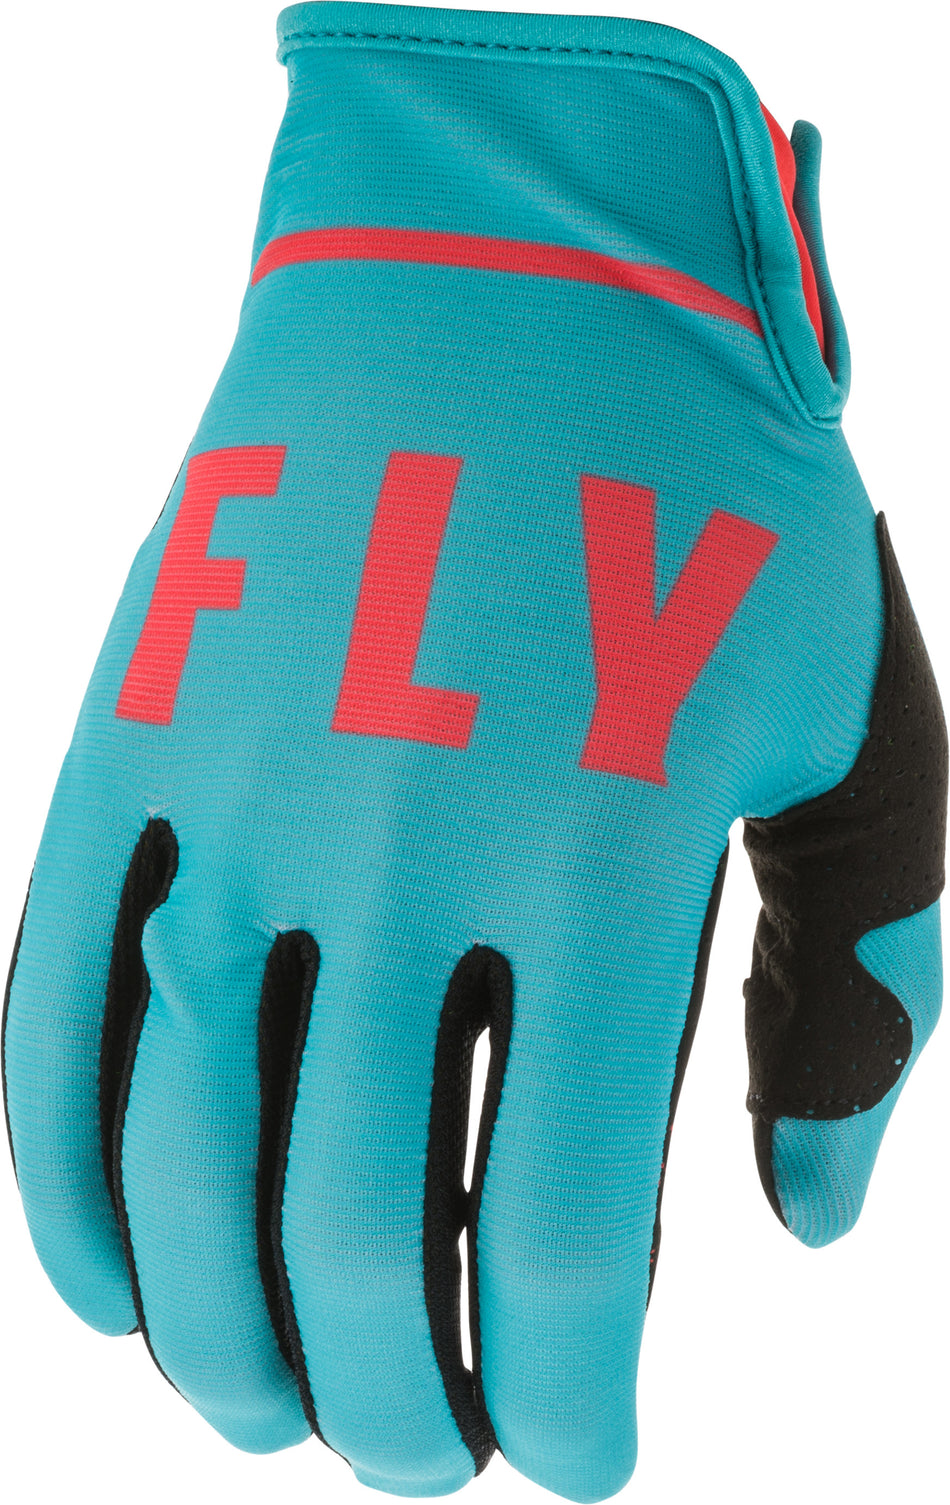 FLY RACING Lite Gloves Blue/Coral Sz 10 373-71910